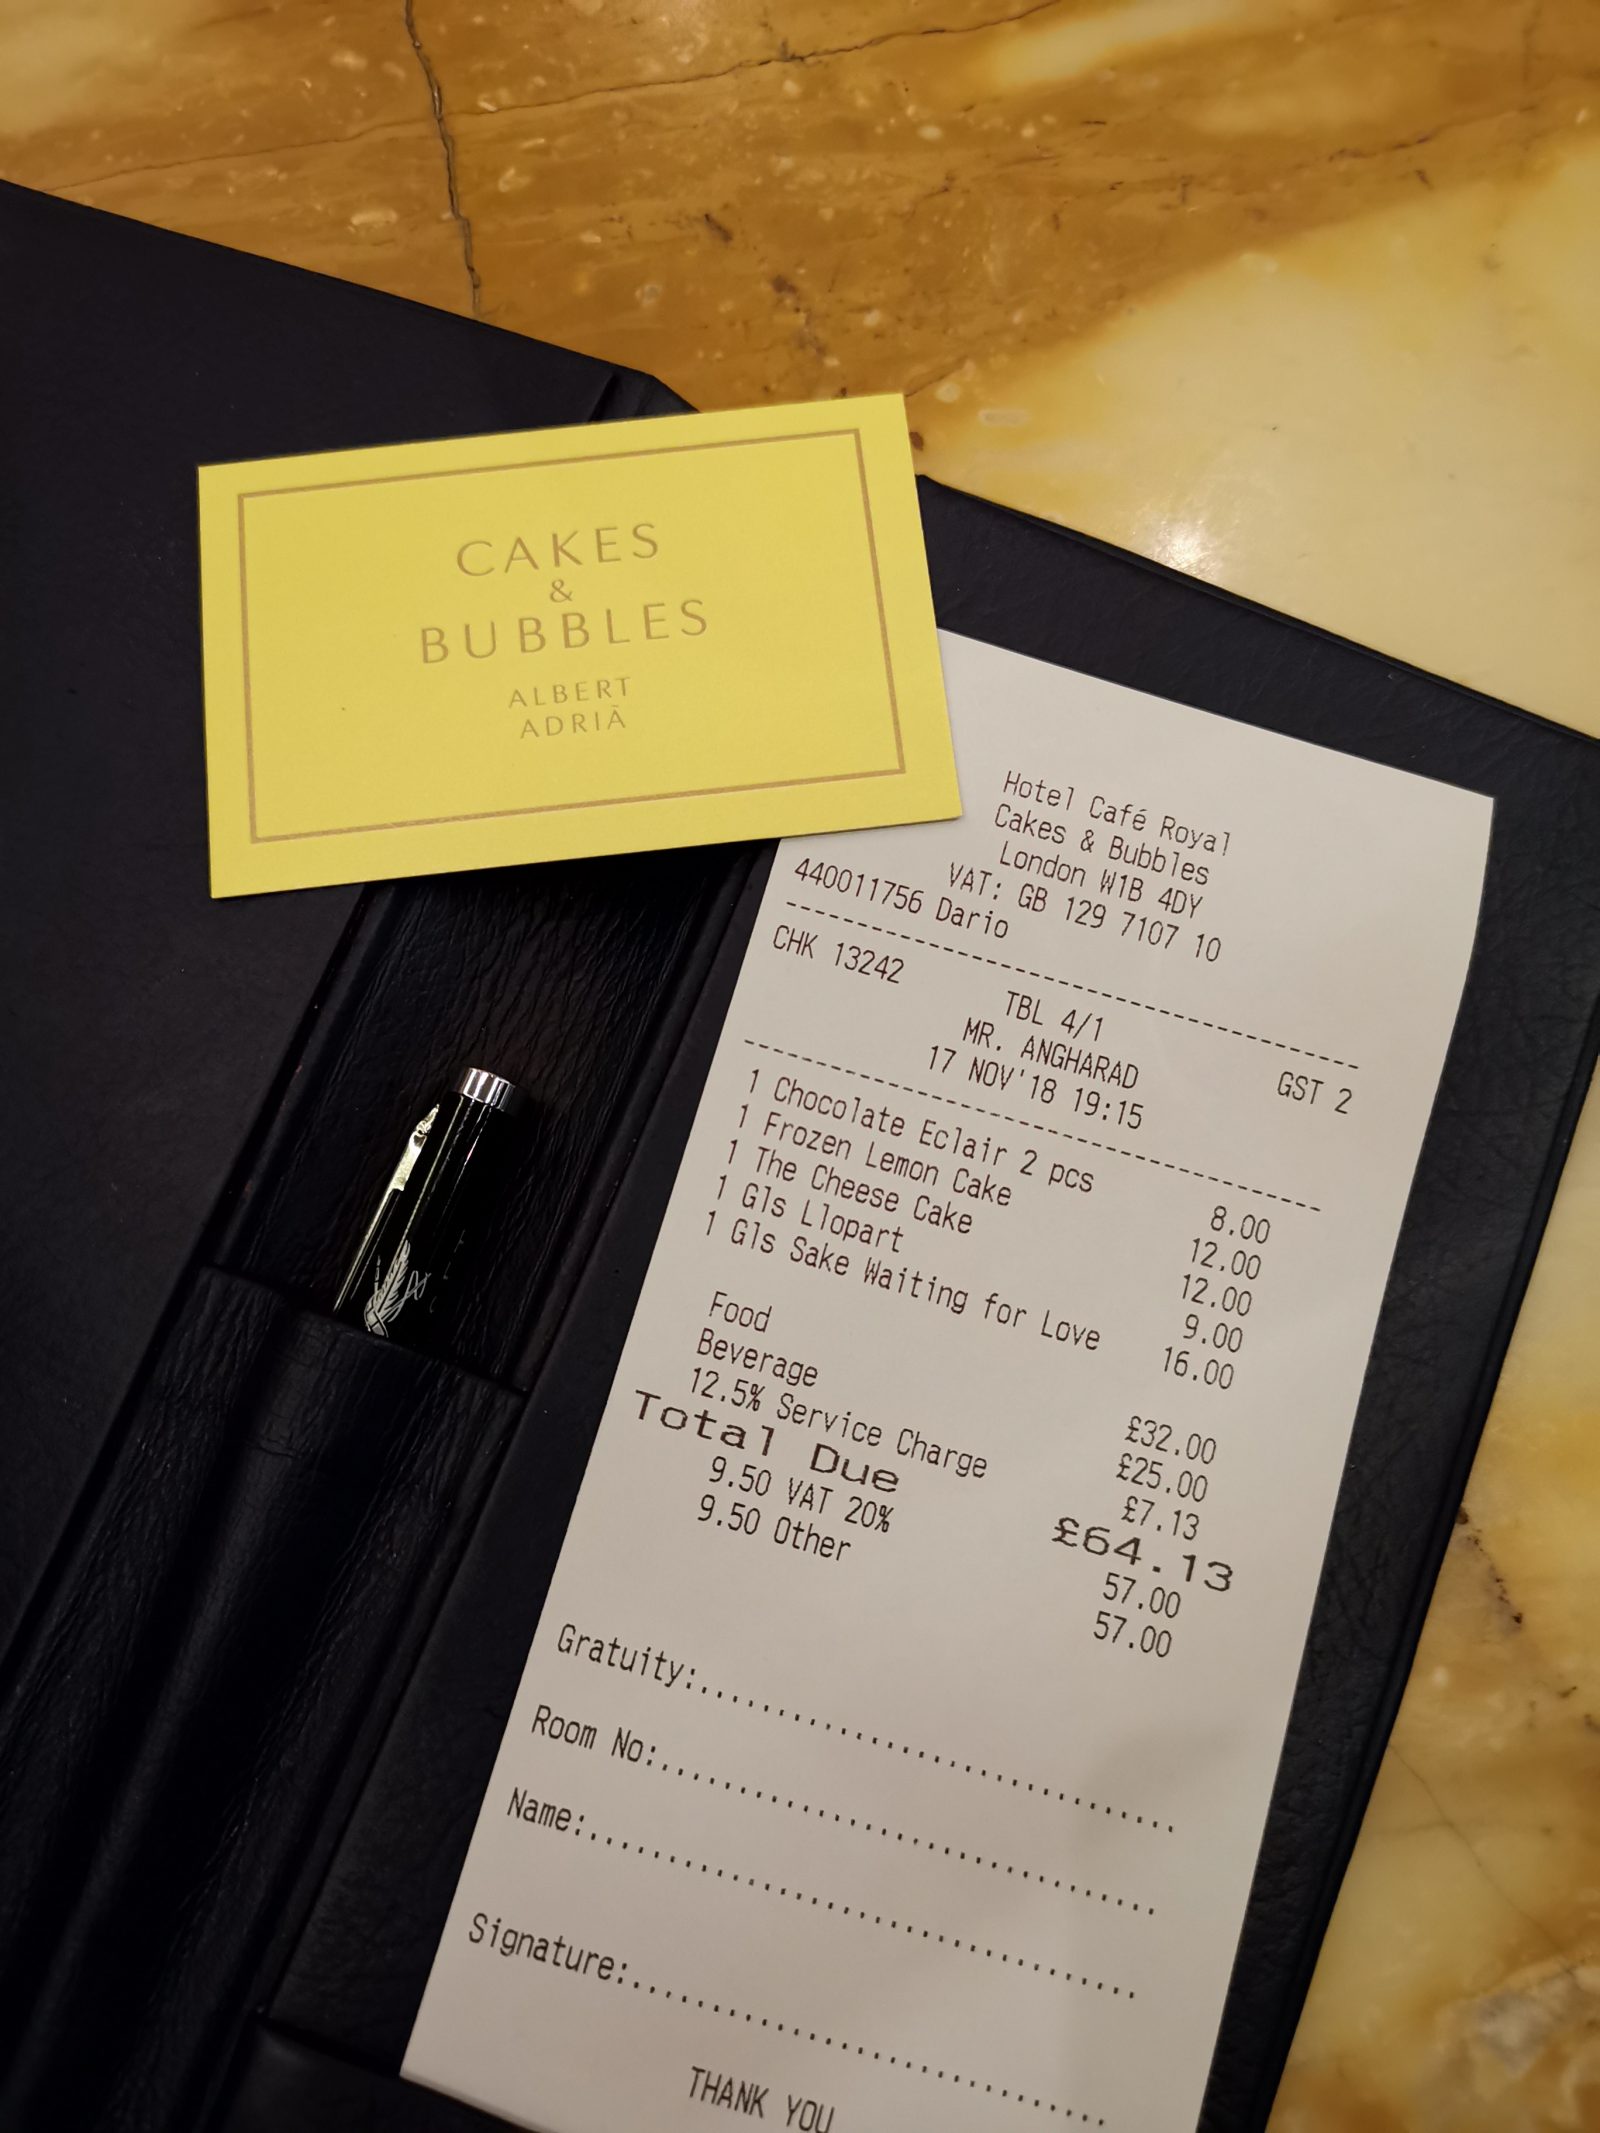 The bill for cakes and bubbles - hotel cafe royal london